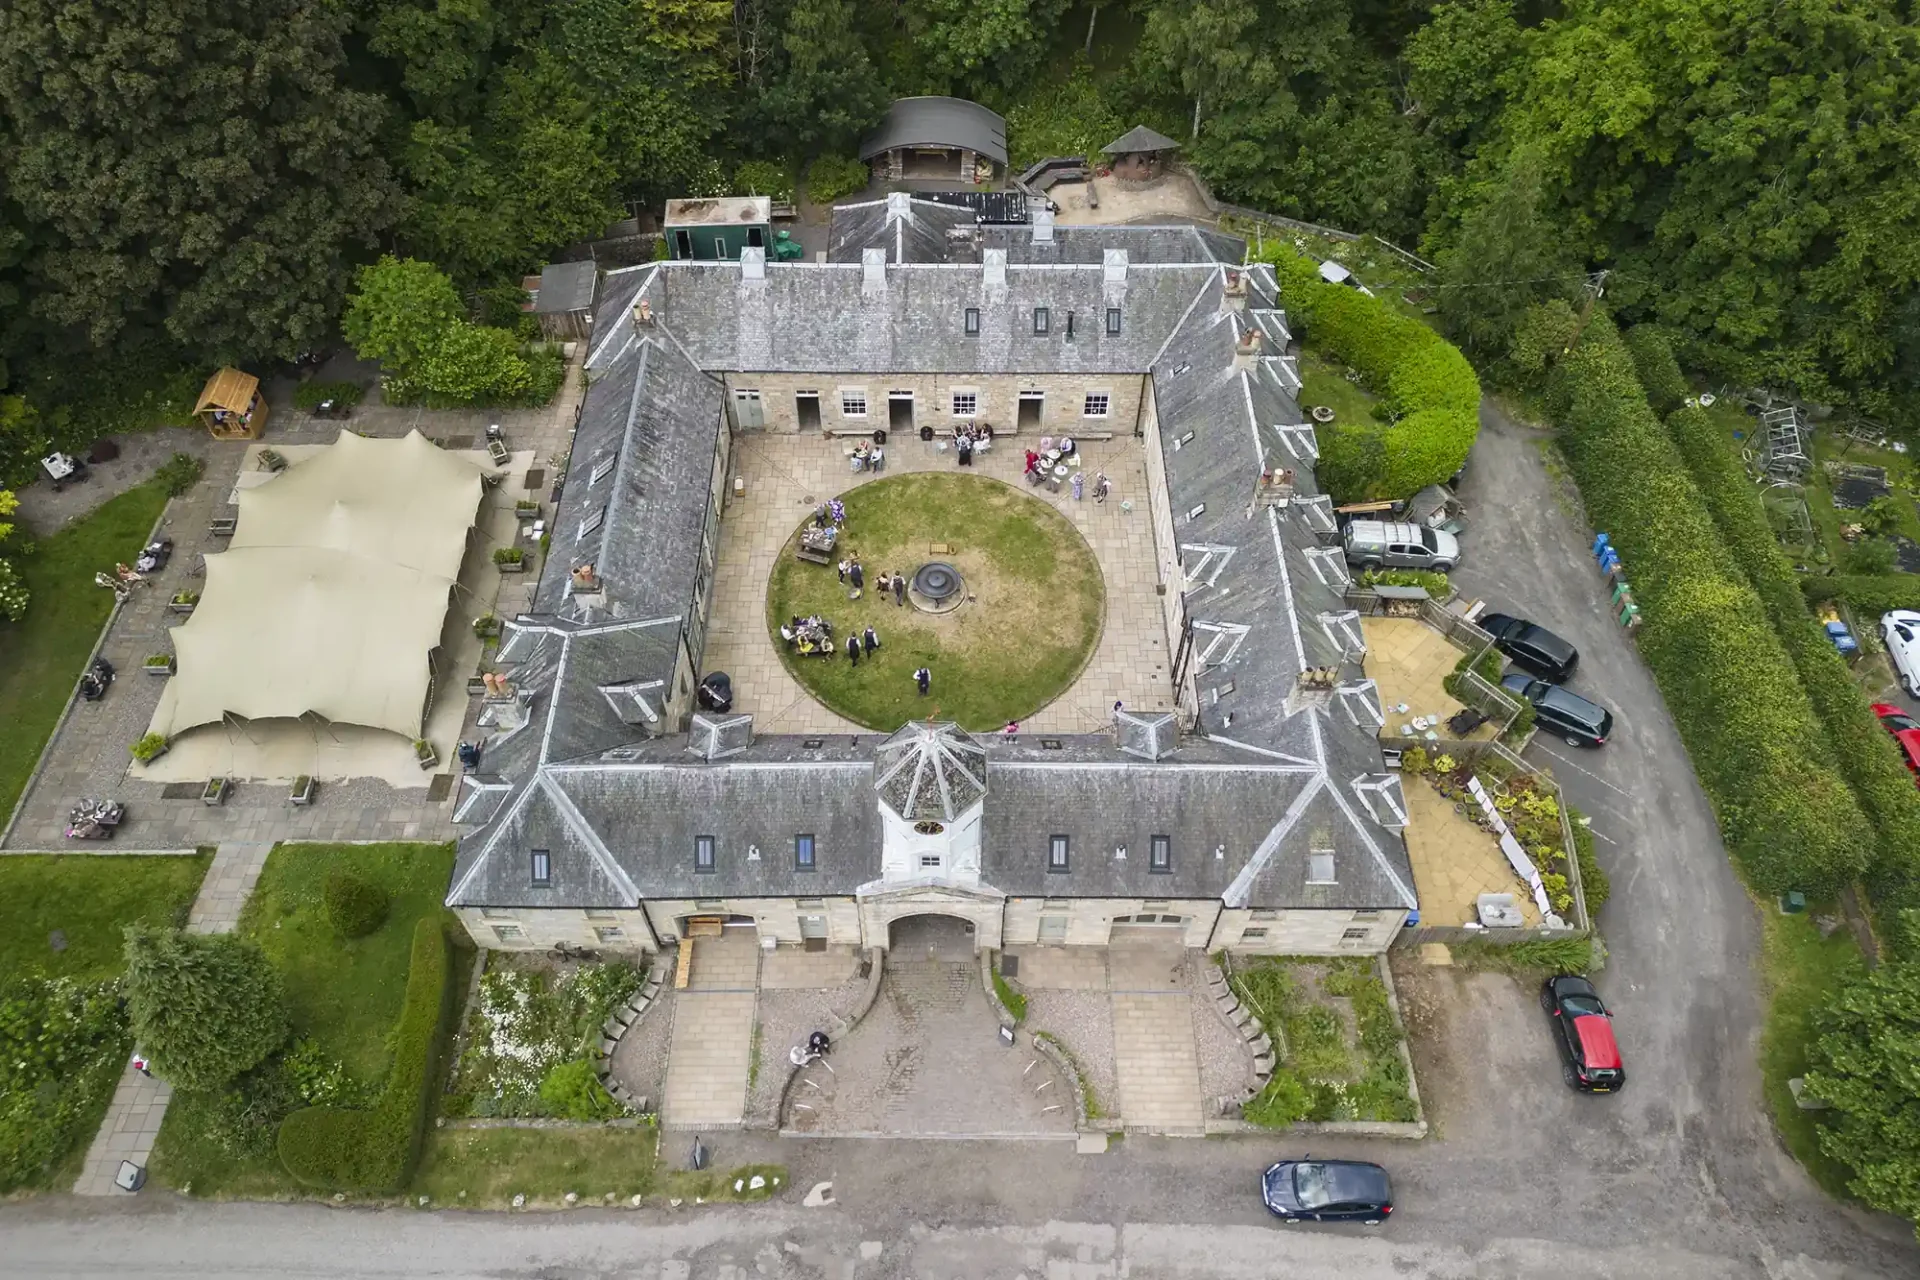 Aerial view of a large, historic stone building with a courtyard, surrounded by lush green trees, with several cars parked around.